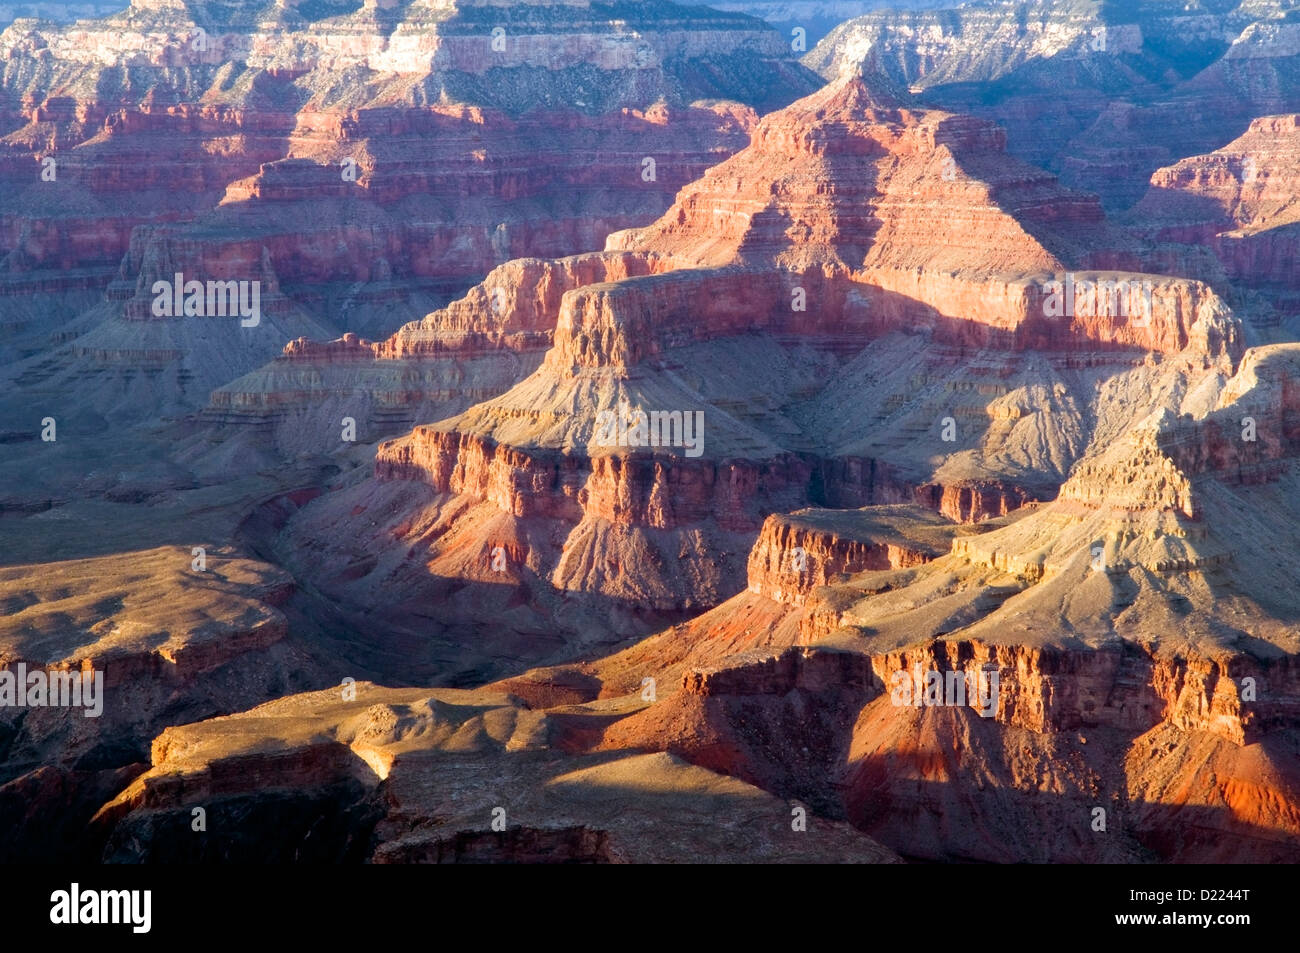 Grand Canyon National Park in late afternoon light as seen from the South Rim, Arizona. Stock Photo